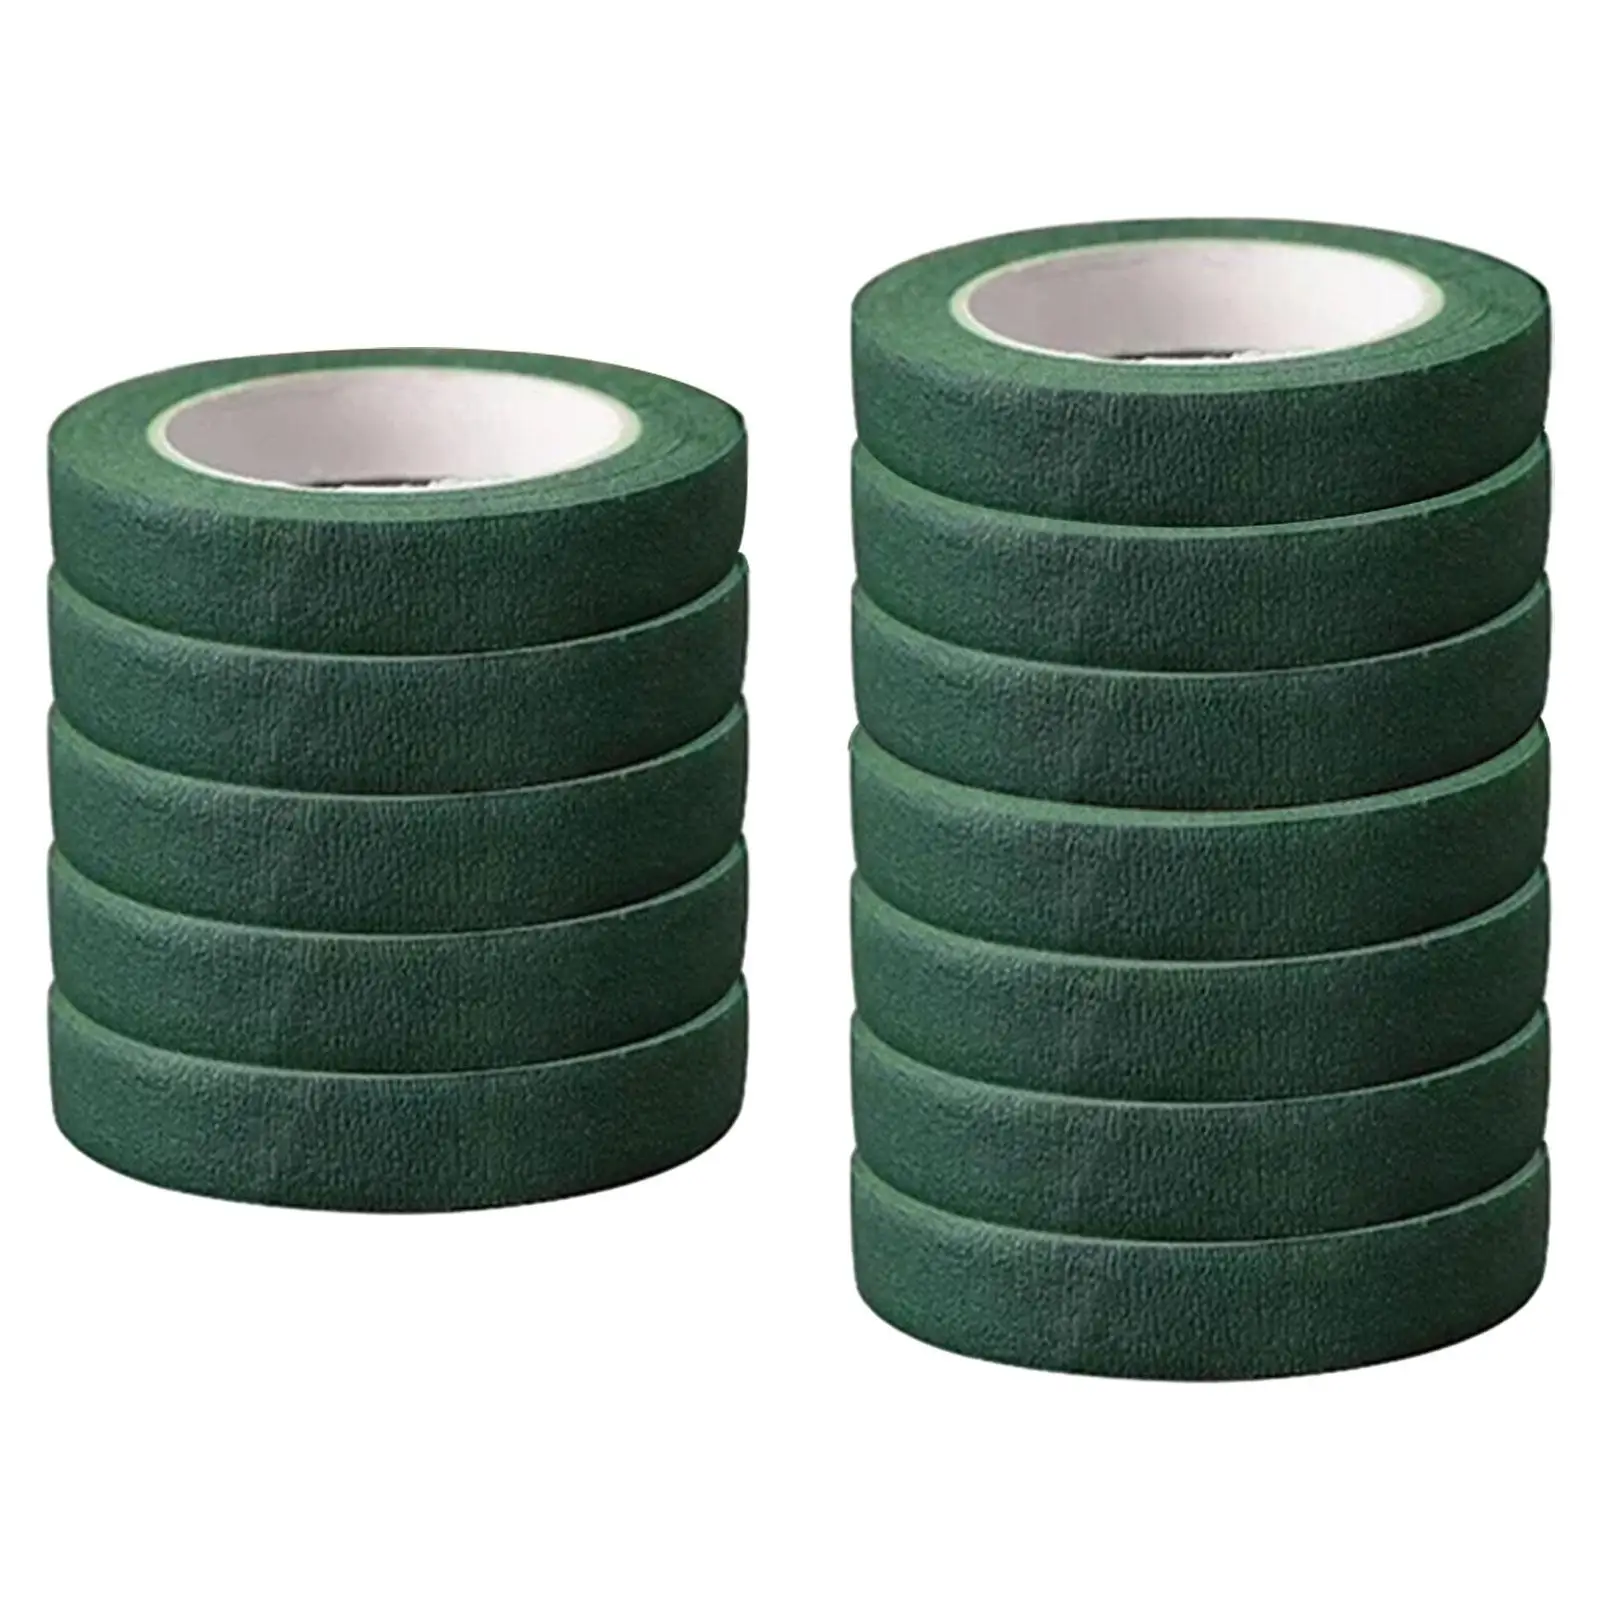 12 Rolls Floral Tapes DIY Length 30M Dark Green Flower Tapes for Home Decoration Bouquet Stem Wrapping Wedding Bridal Bouquets